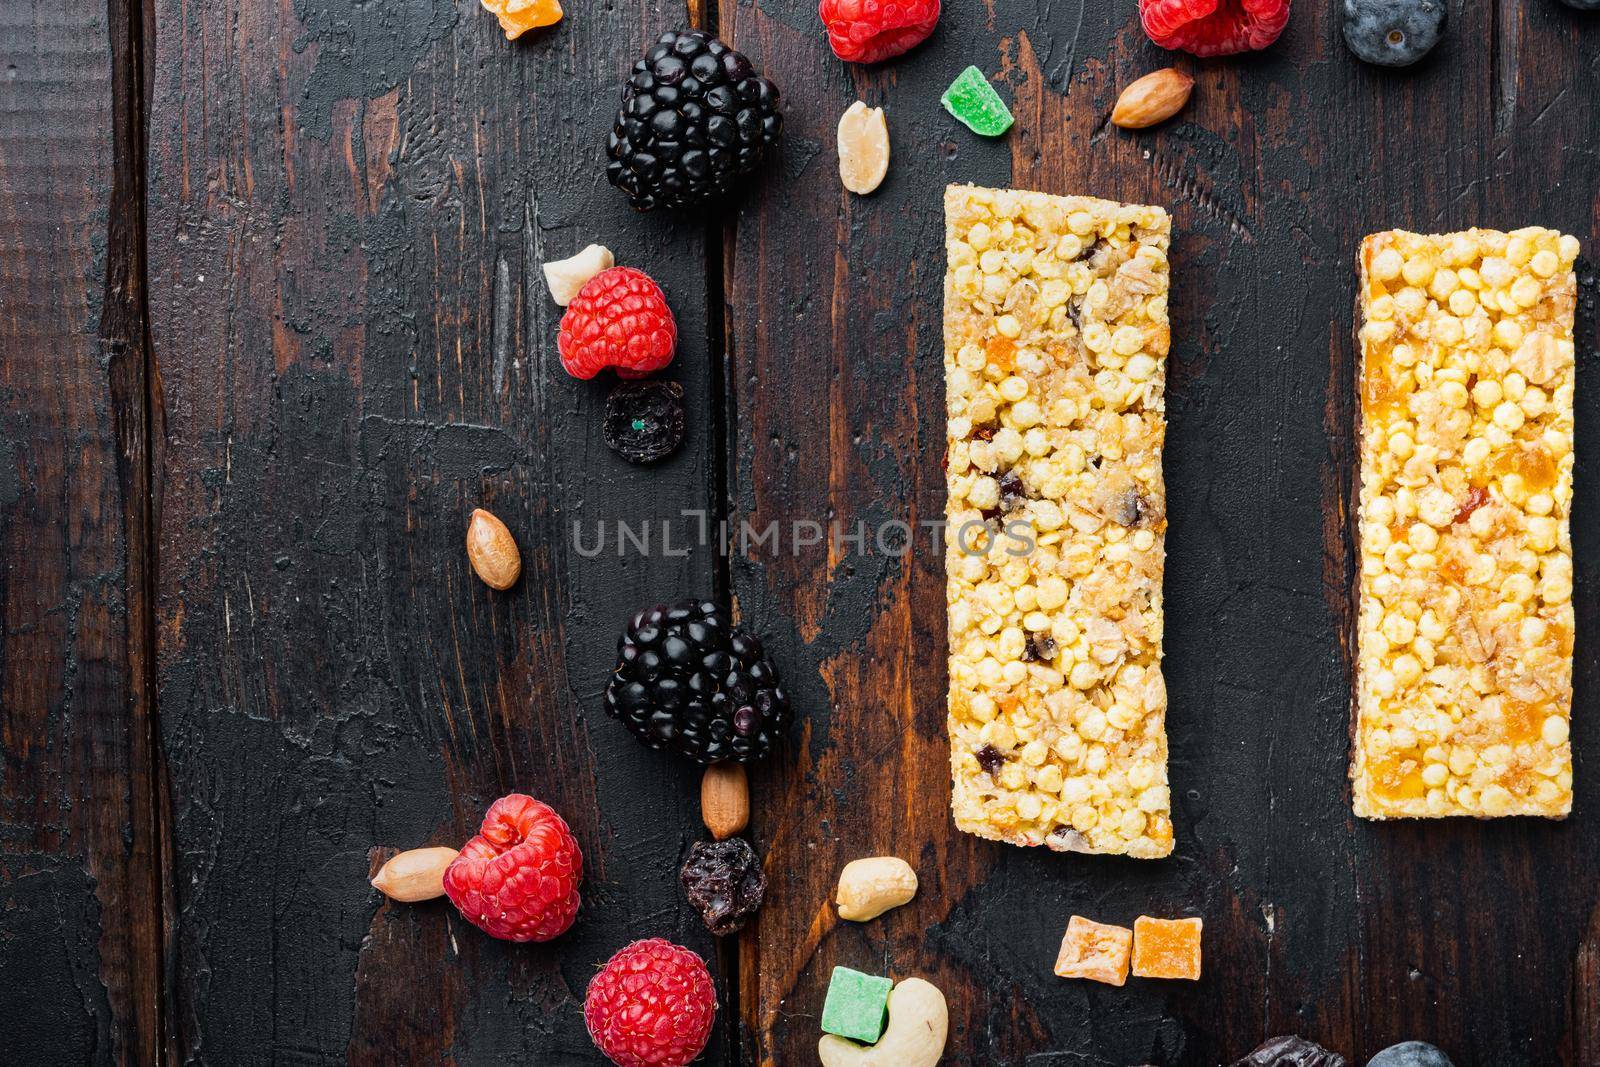 Healthy snacks, fitness lifestyle and high fiber diet concept, top view with copy space, on wooden table by Ilianesolenyi